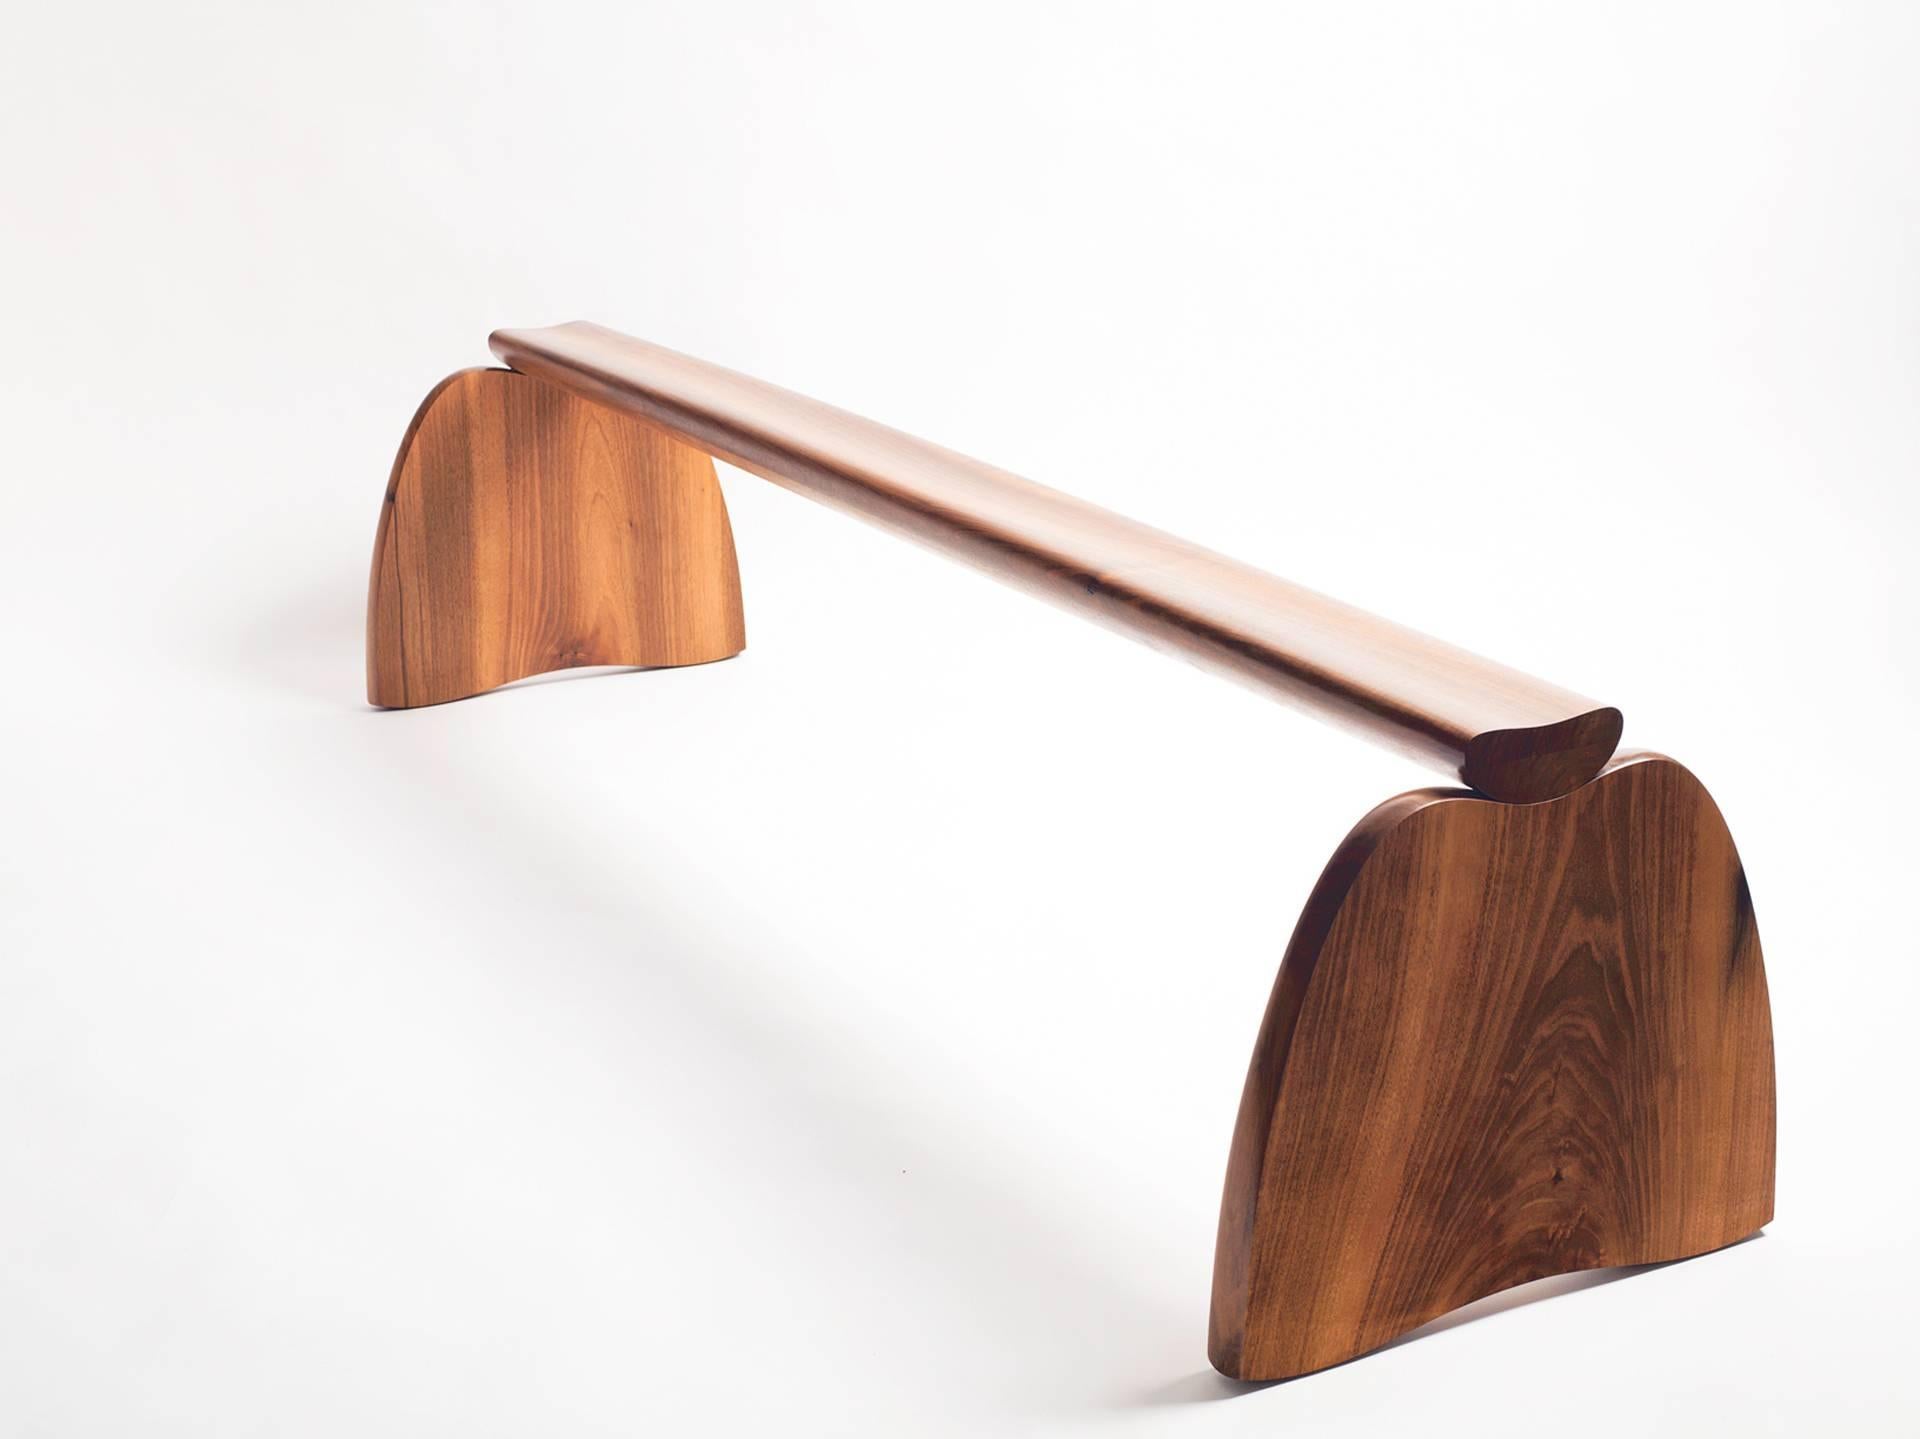 Manufacturer:
Rutger Graas.
 
Description:
The Pose bench results from the collaboration between Amsterdam-based designer, Aldo Bakker and woodcraft-master, Rutger Graas. 
 
Alice Rawsthorn described Pose in the New York Times: “At first